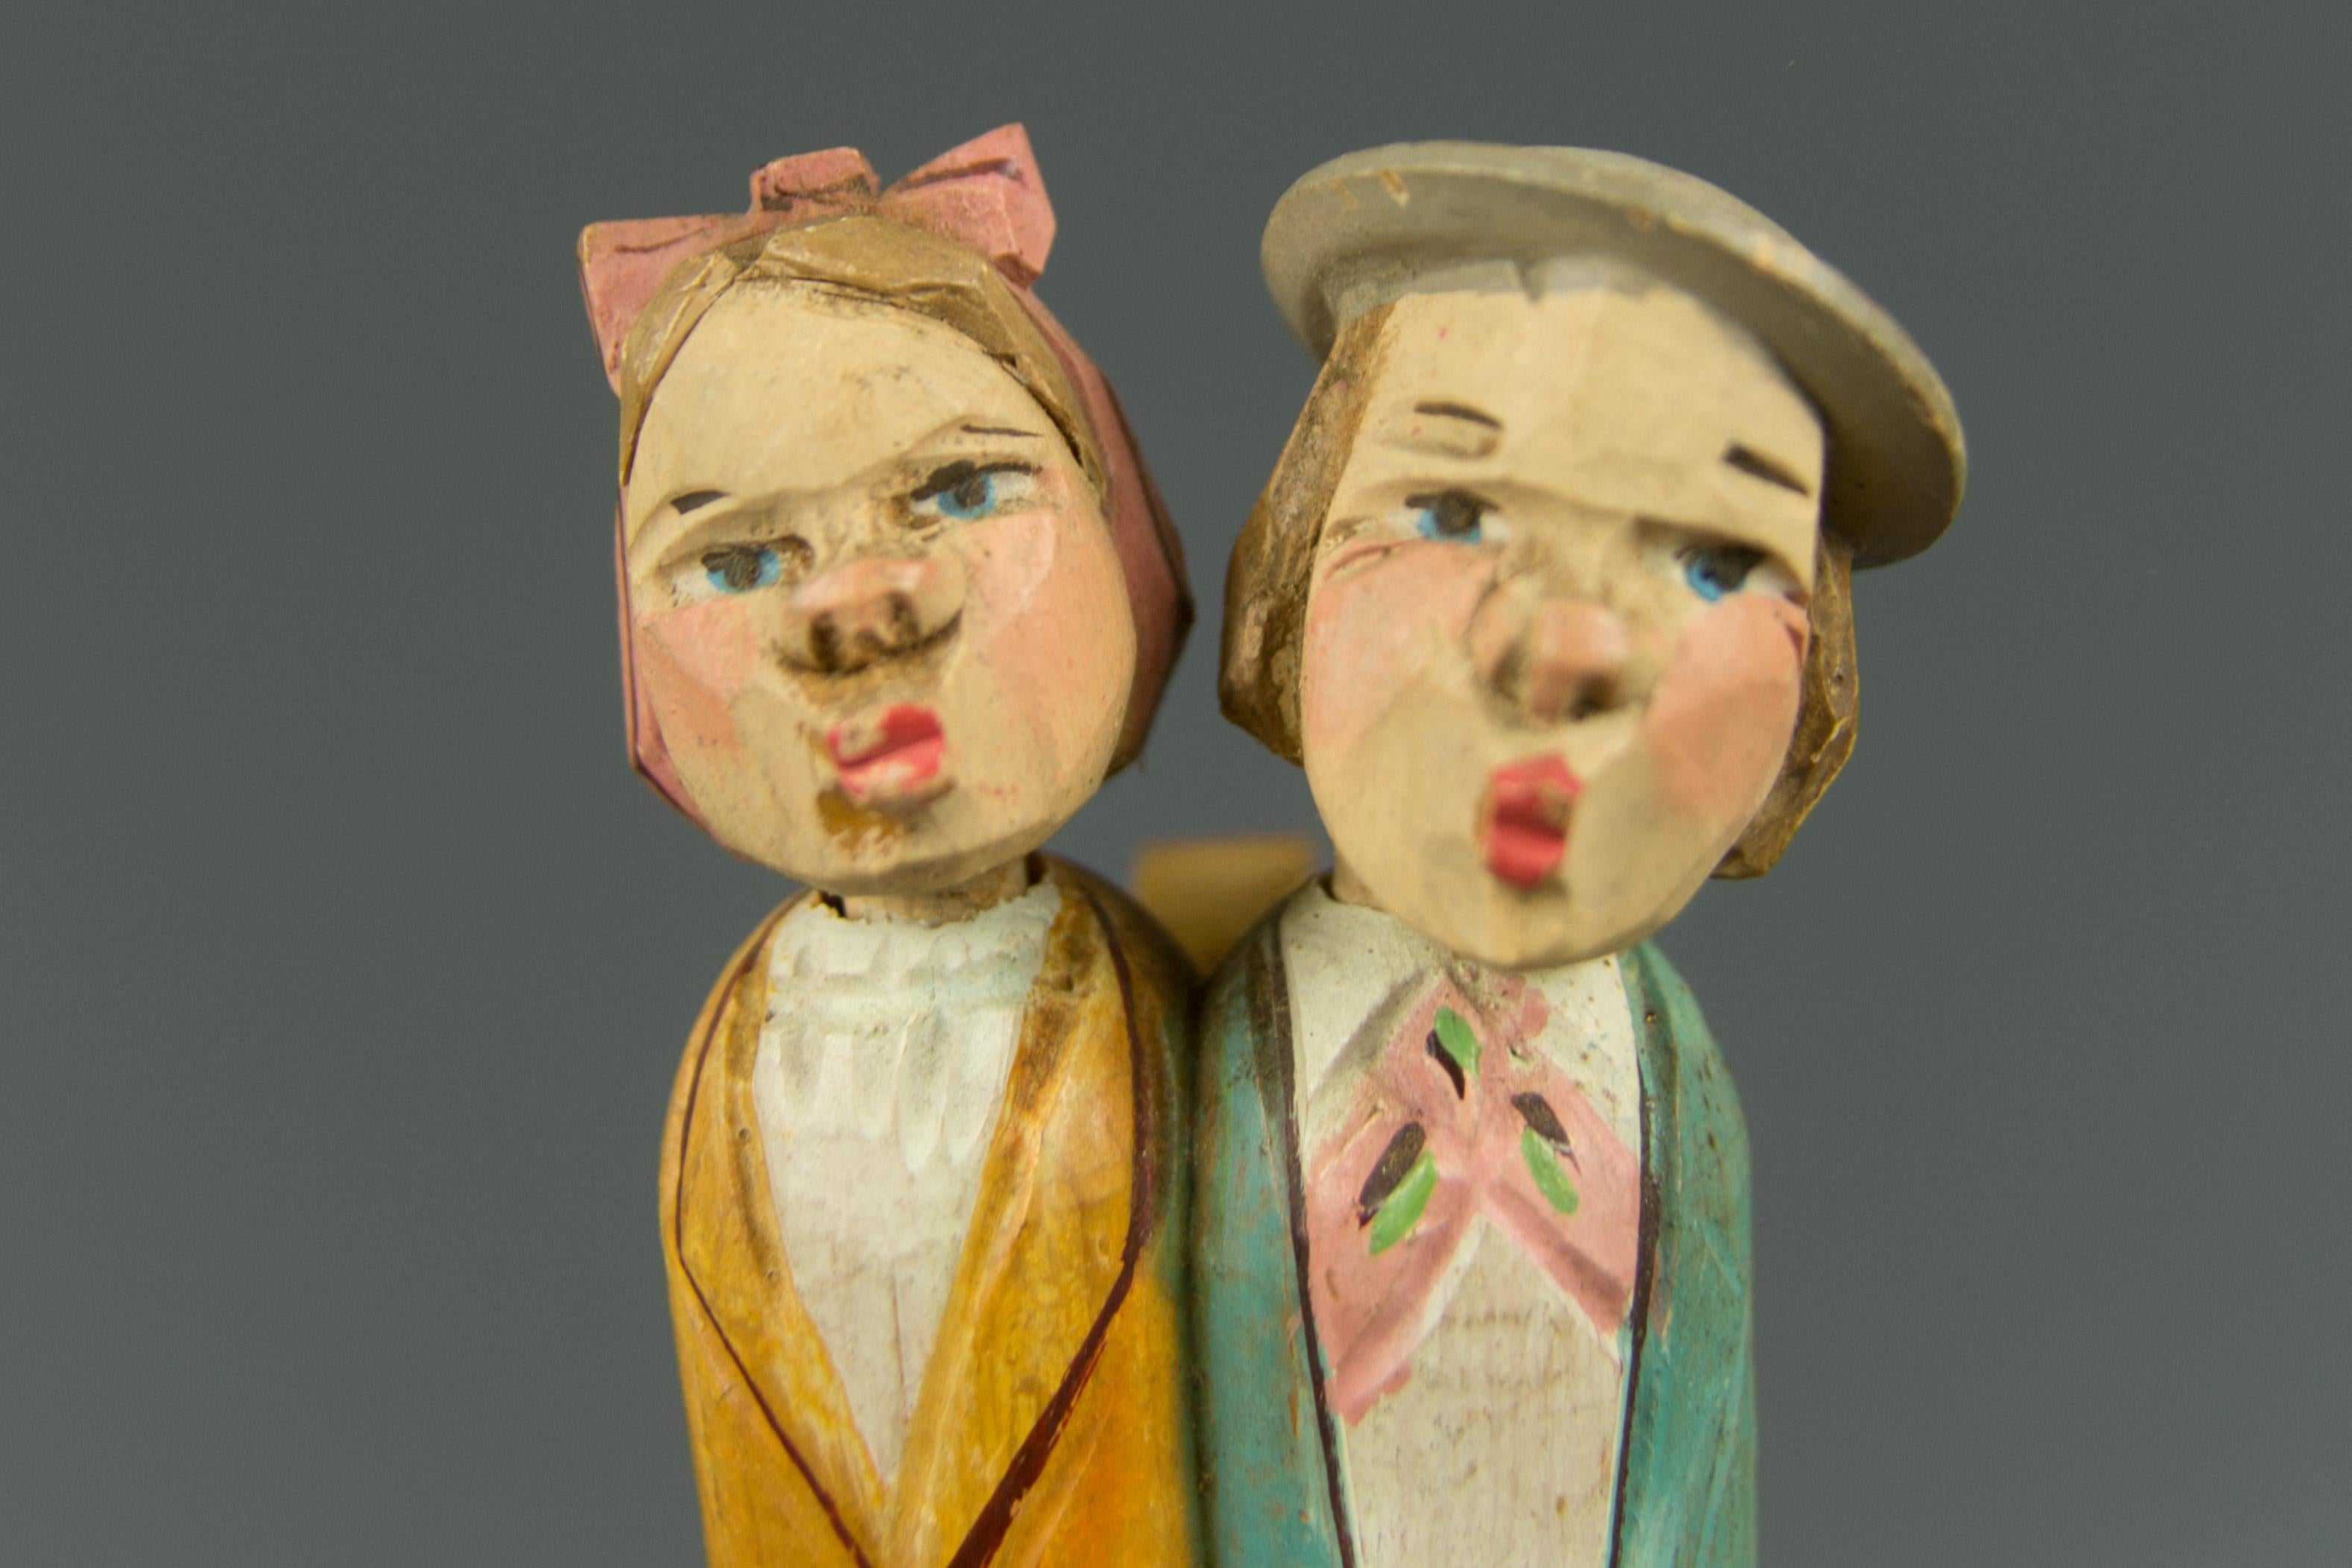 Hand-Carved Hand Carved and Painted Mechanical Wooden Bottle Stopper Kissing Couple, 1950s